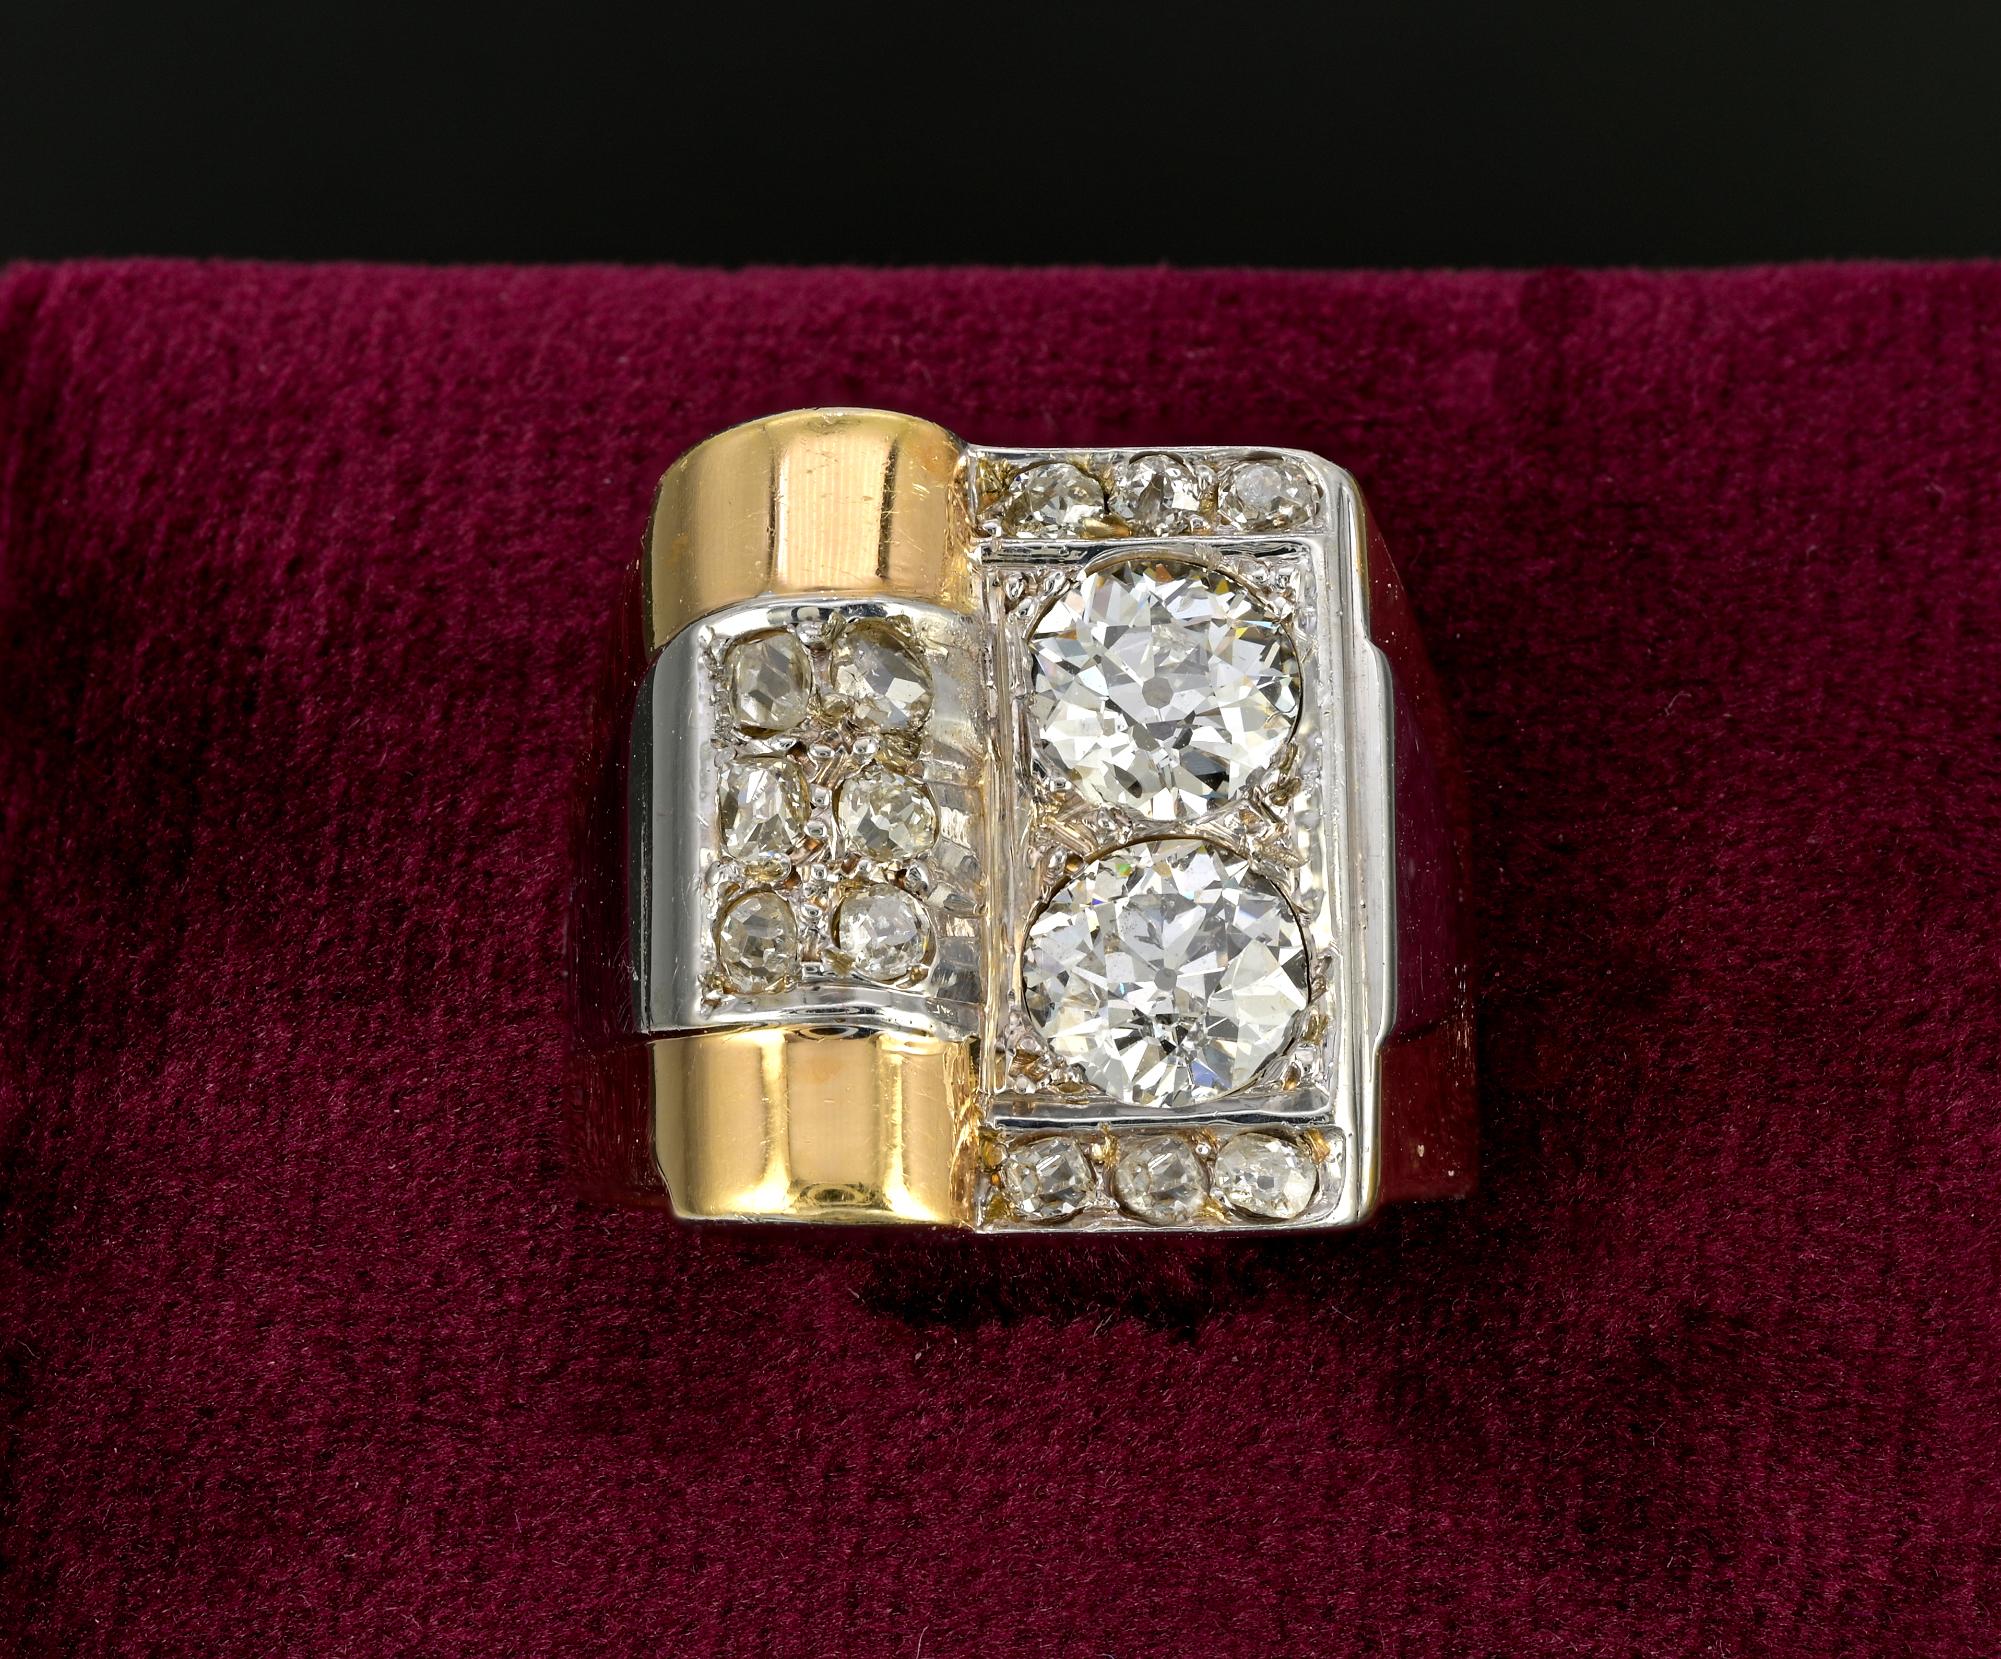 This outstanding Art Deco ring is 1935 ca
Substantially hand crafted solid 18 KT gold with Platinum portions
It bears French hallmarks
Masculine and strong character is expressed by an unique Buckle design pointed on one side by two white sparkly